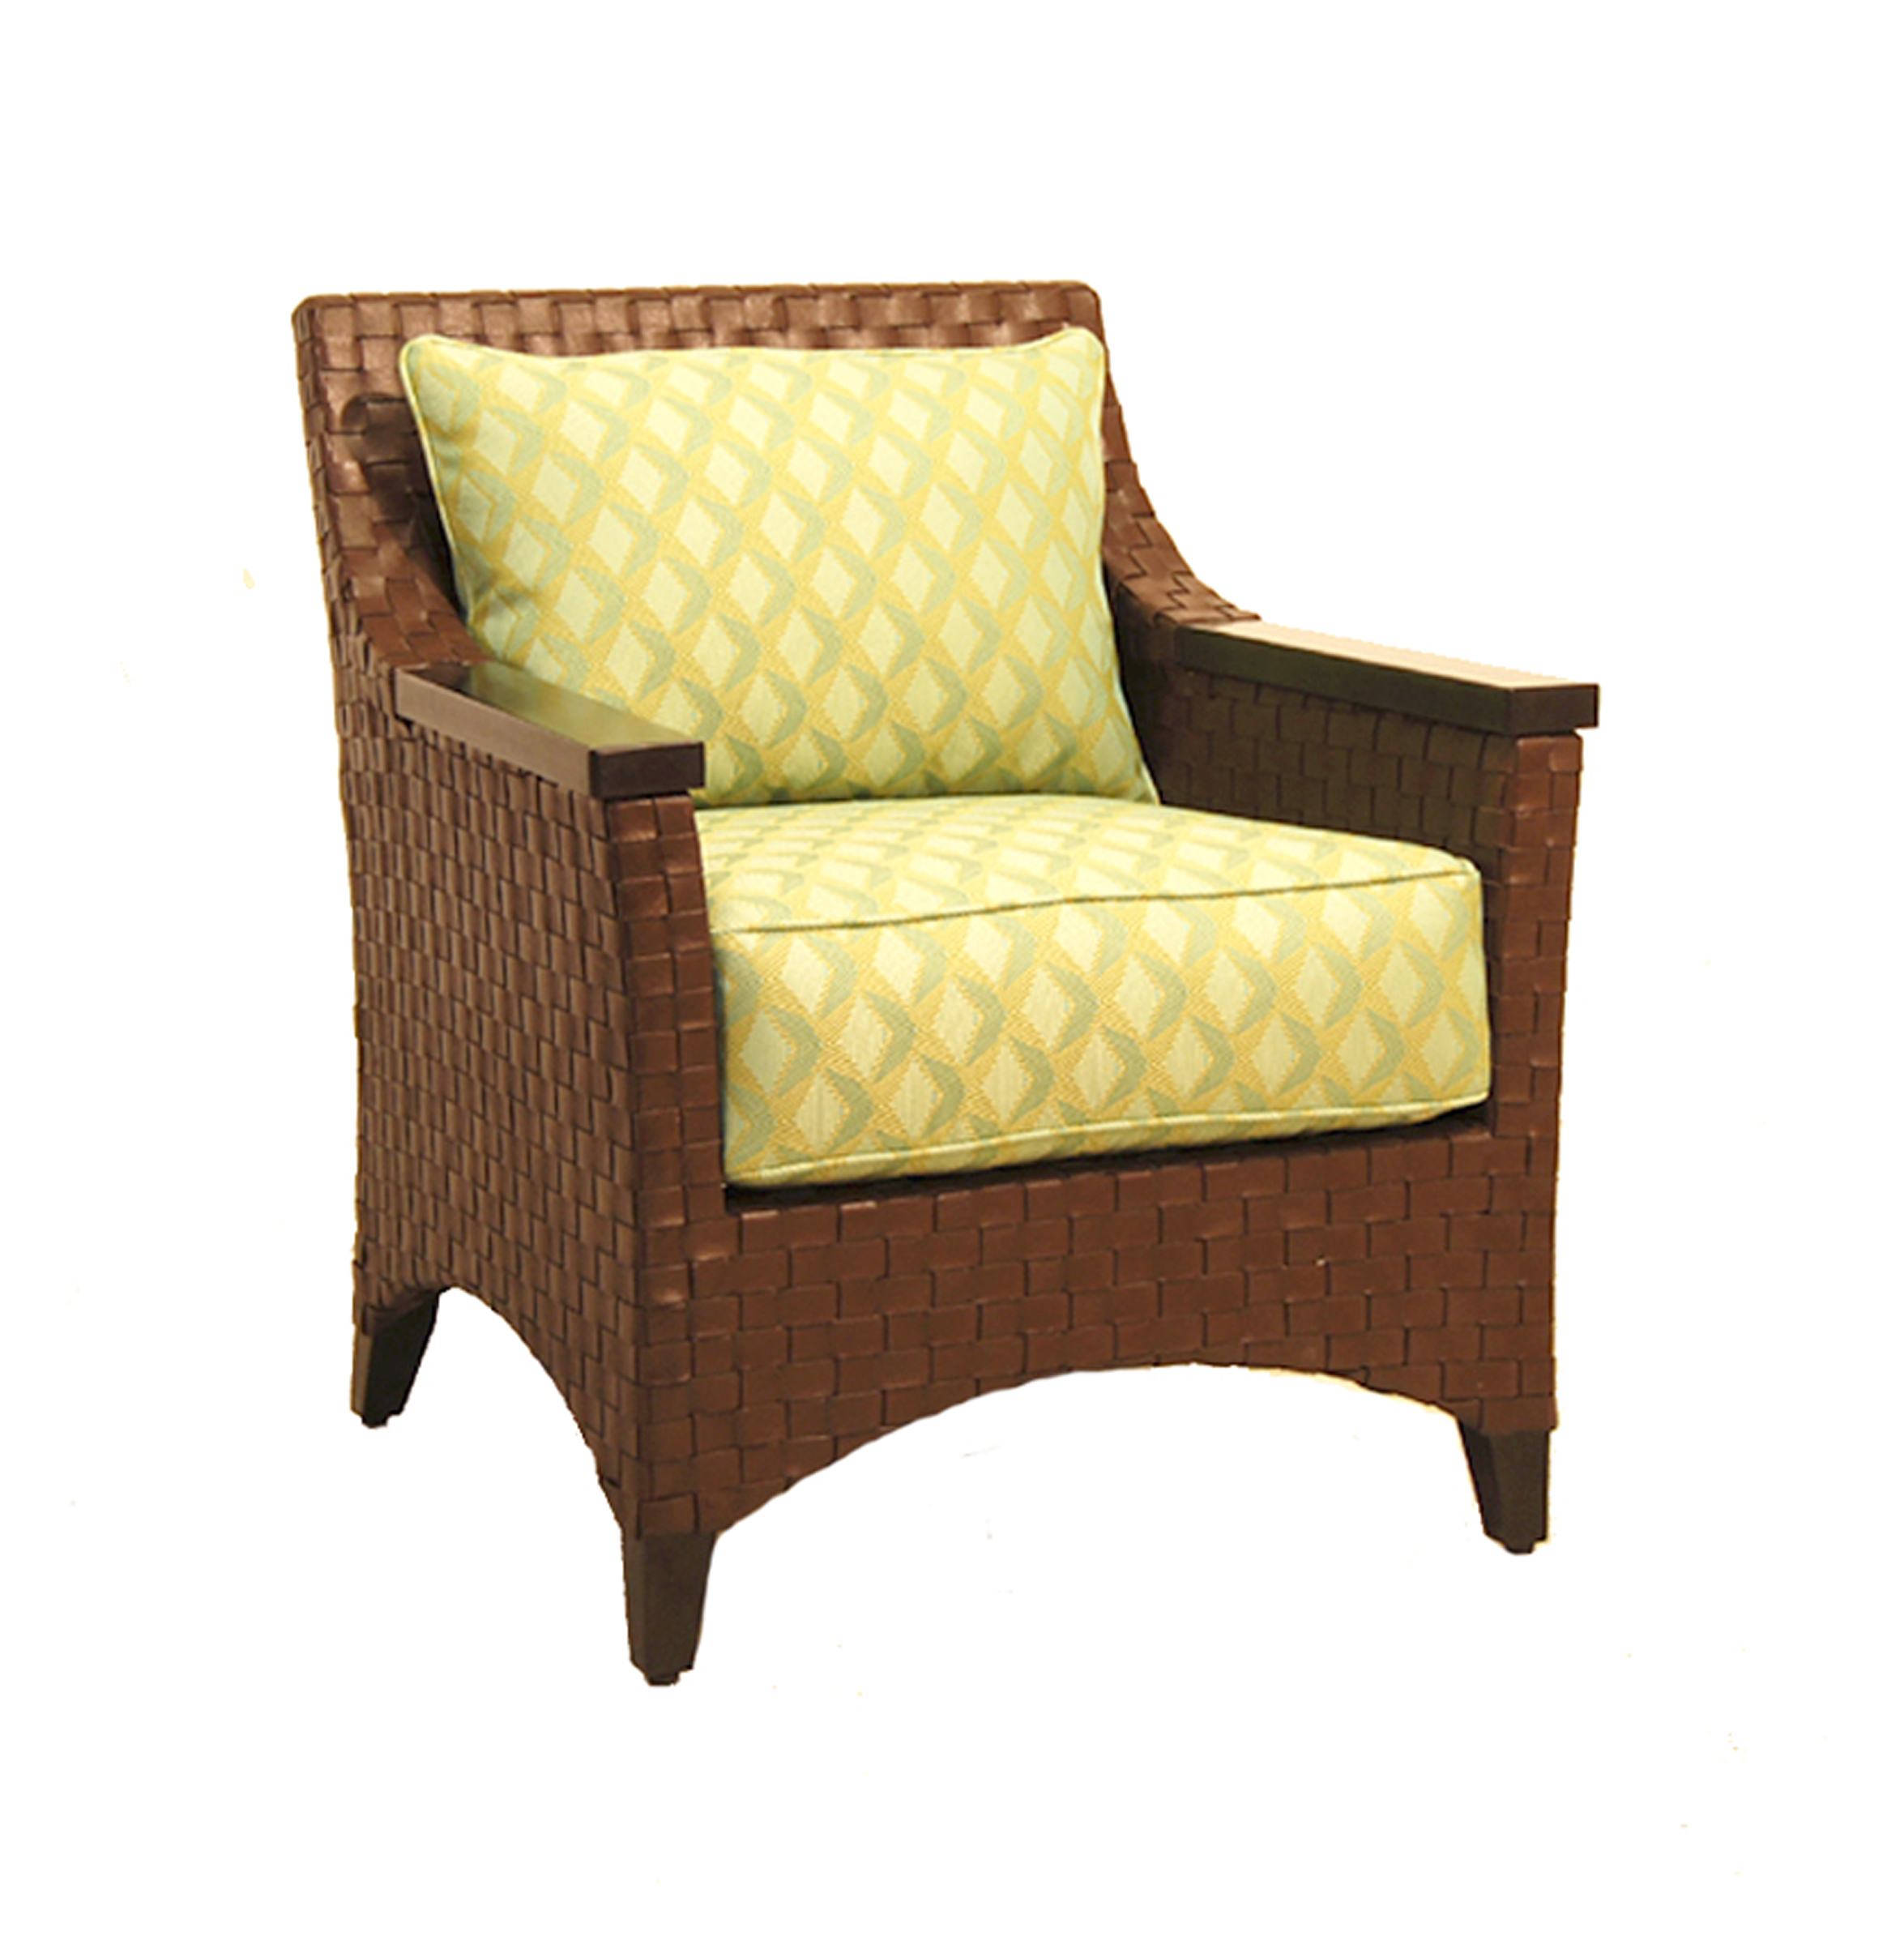 FB-5468 WOOD & LEATHER LOUNGE CHAIR